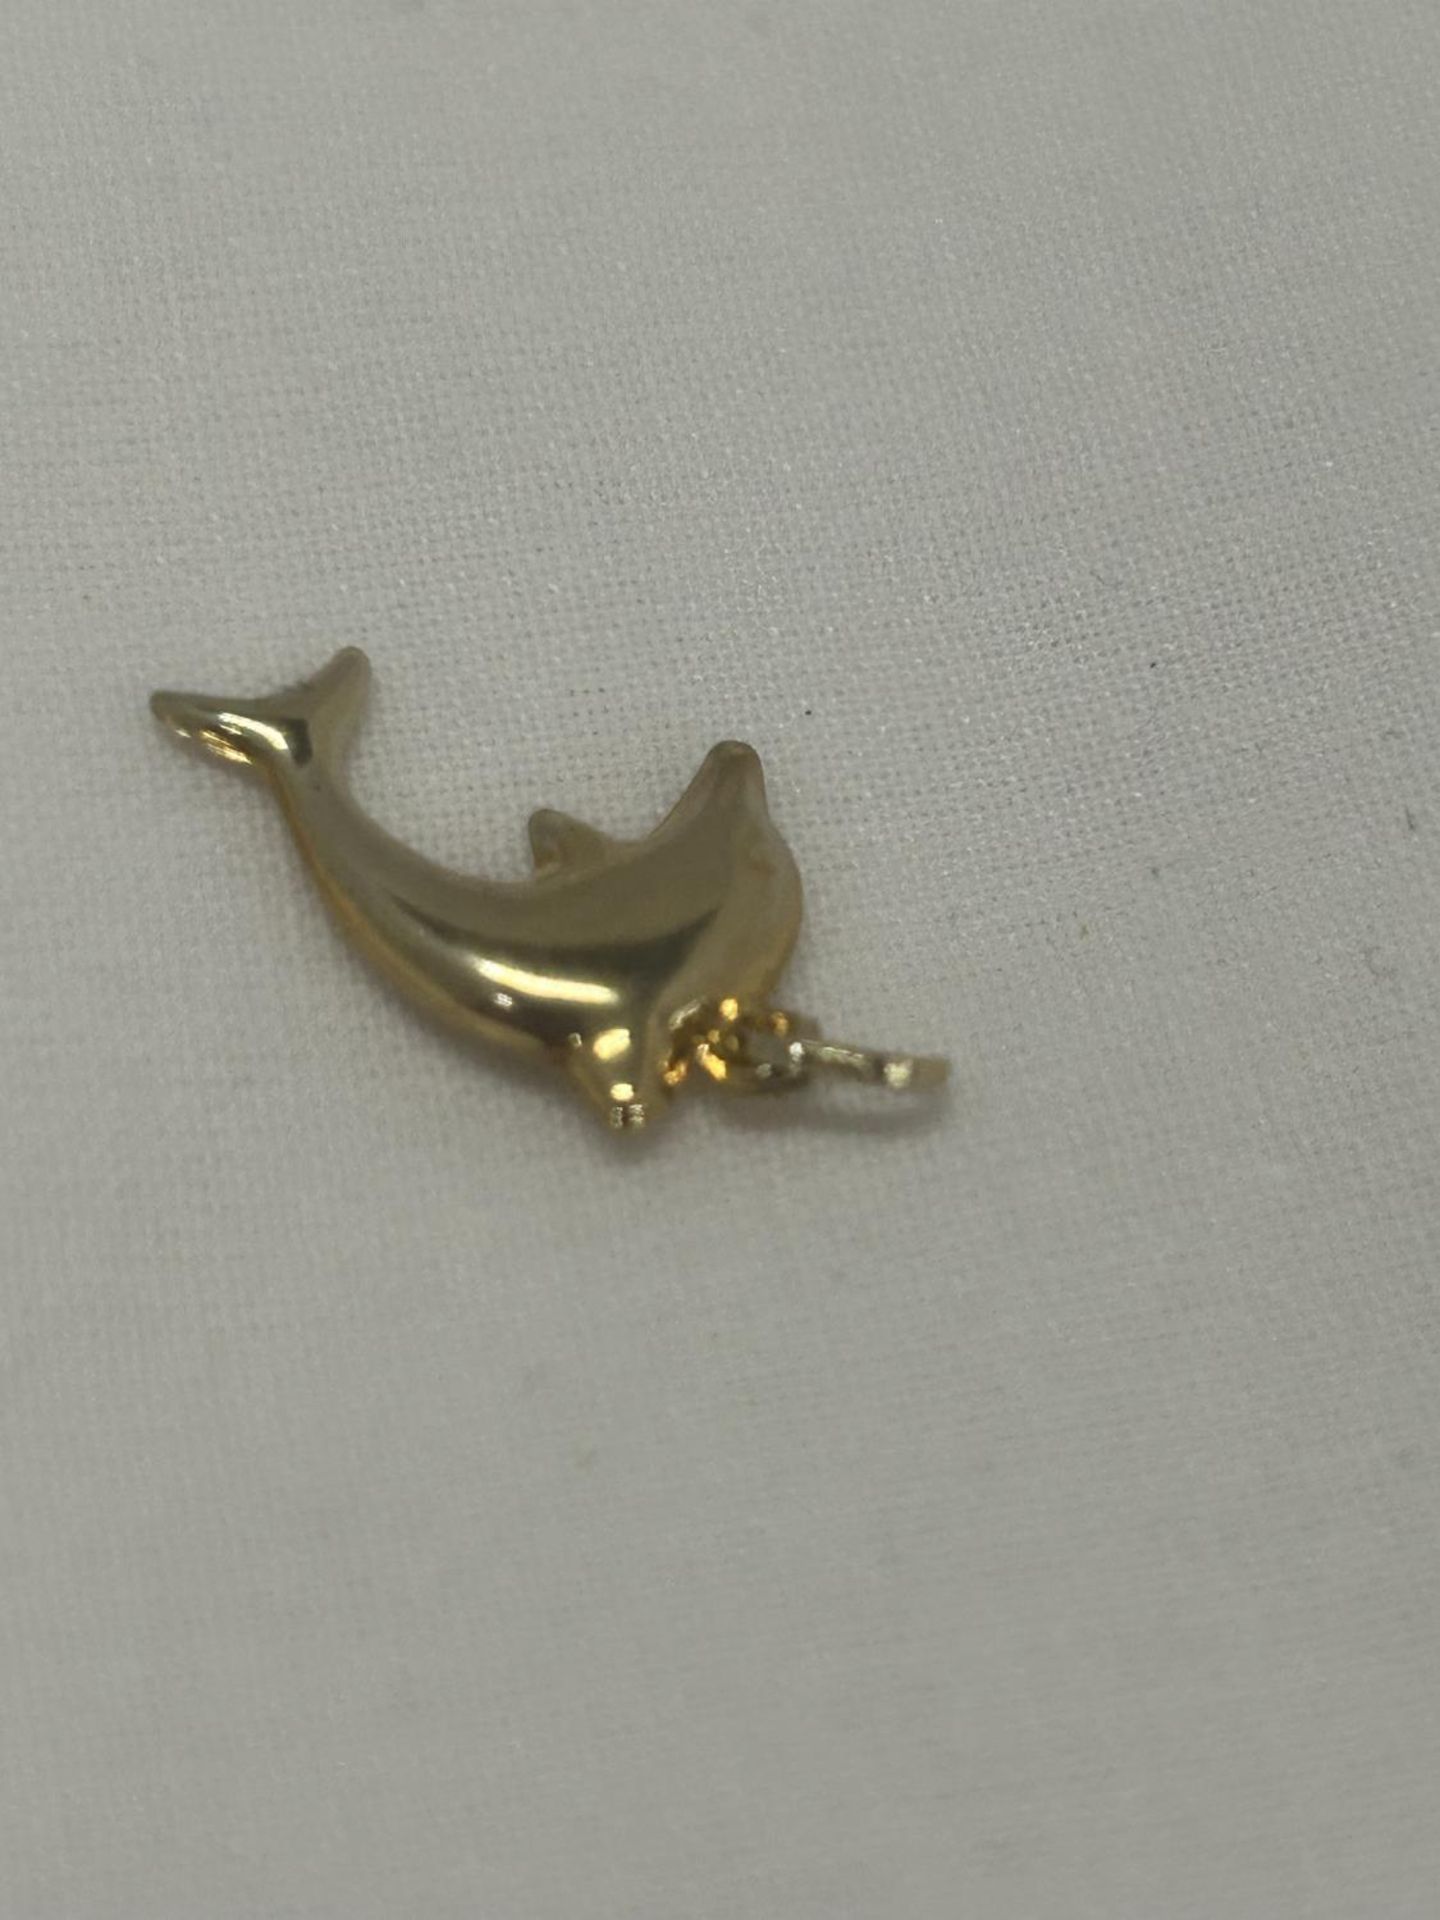 A 9CT YELLOW GOLD DOLPHIN CHARM - Image 3 of 3